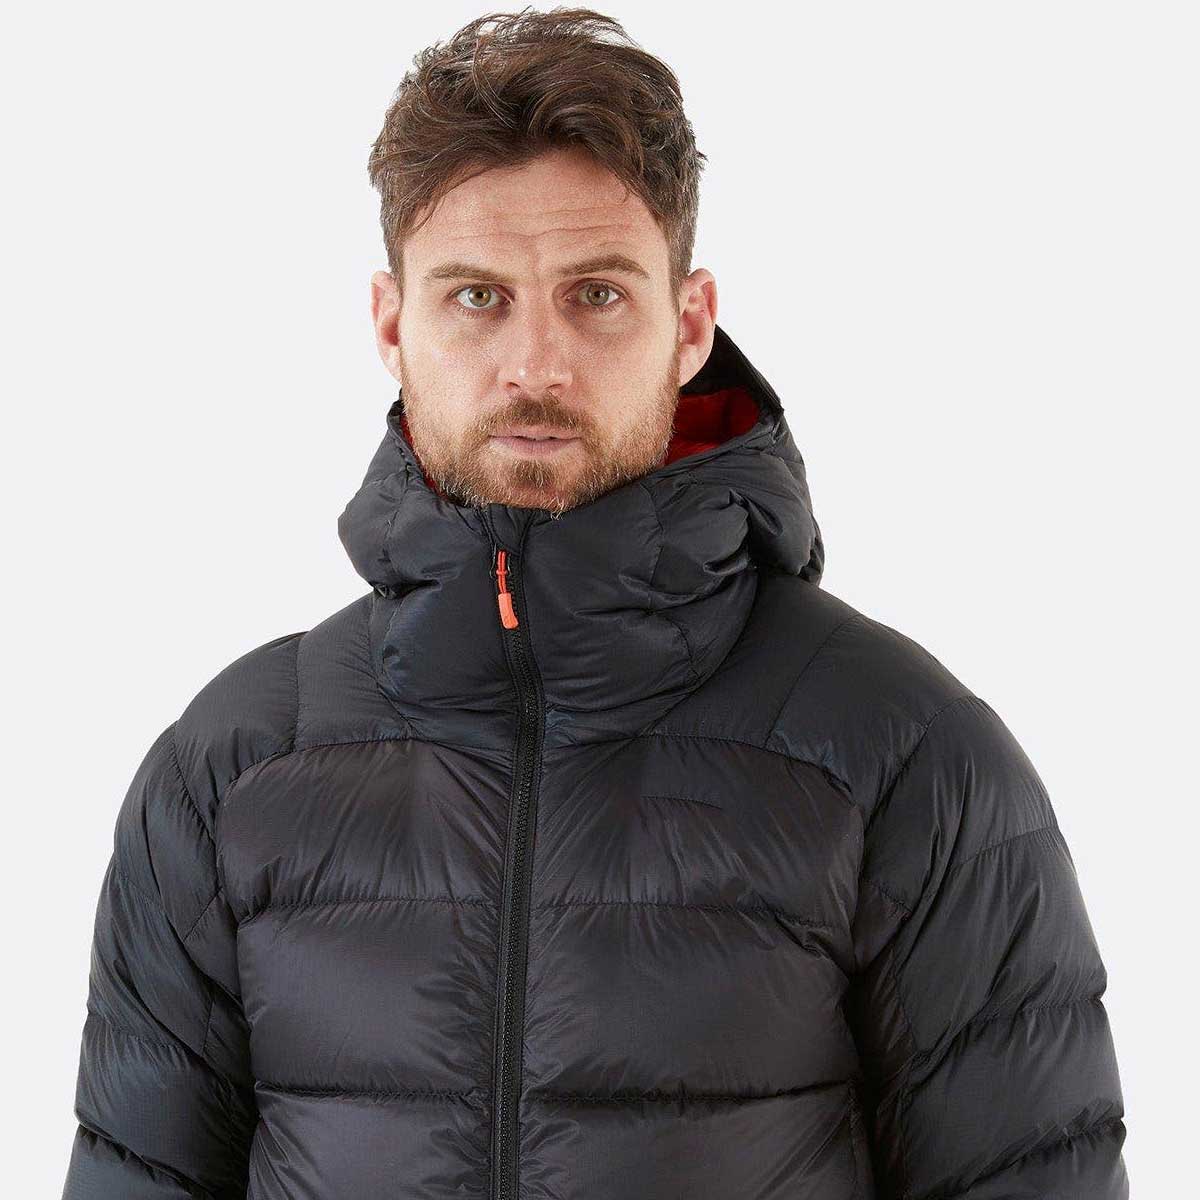 Winter Jackets Manufacturers in Italy